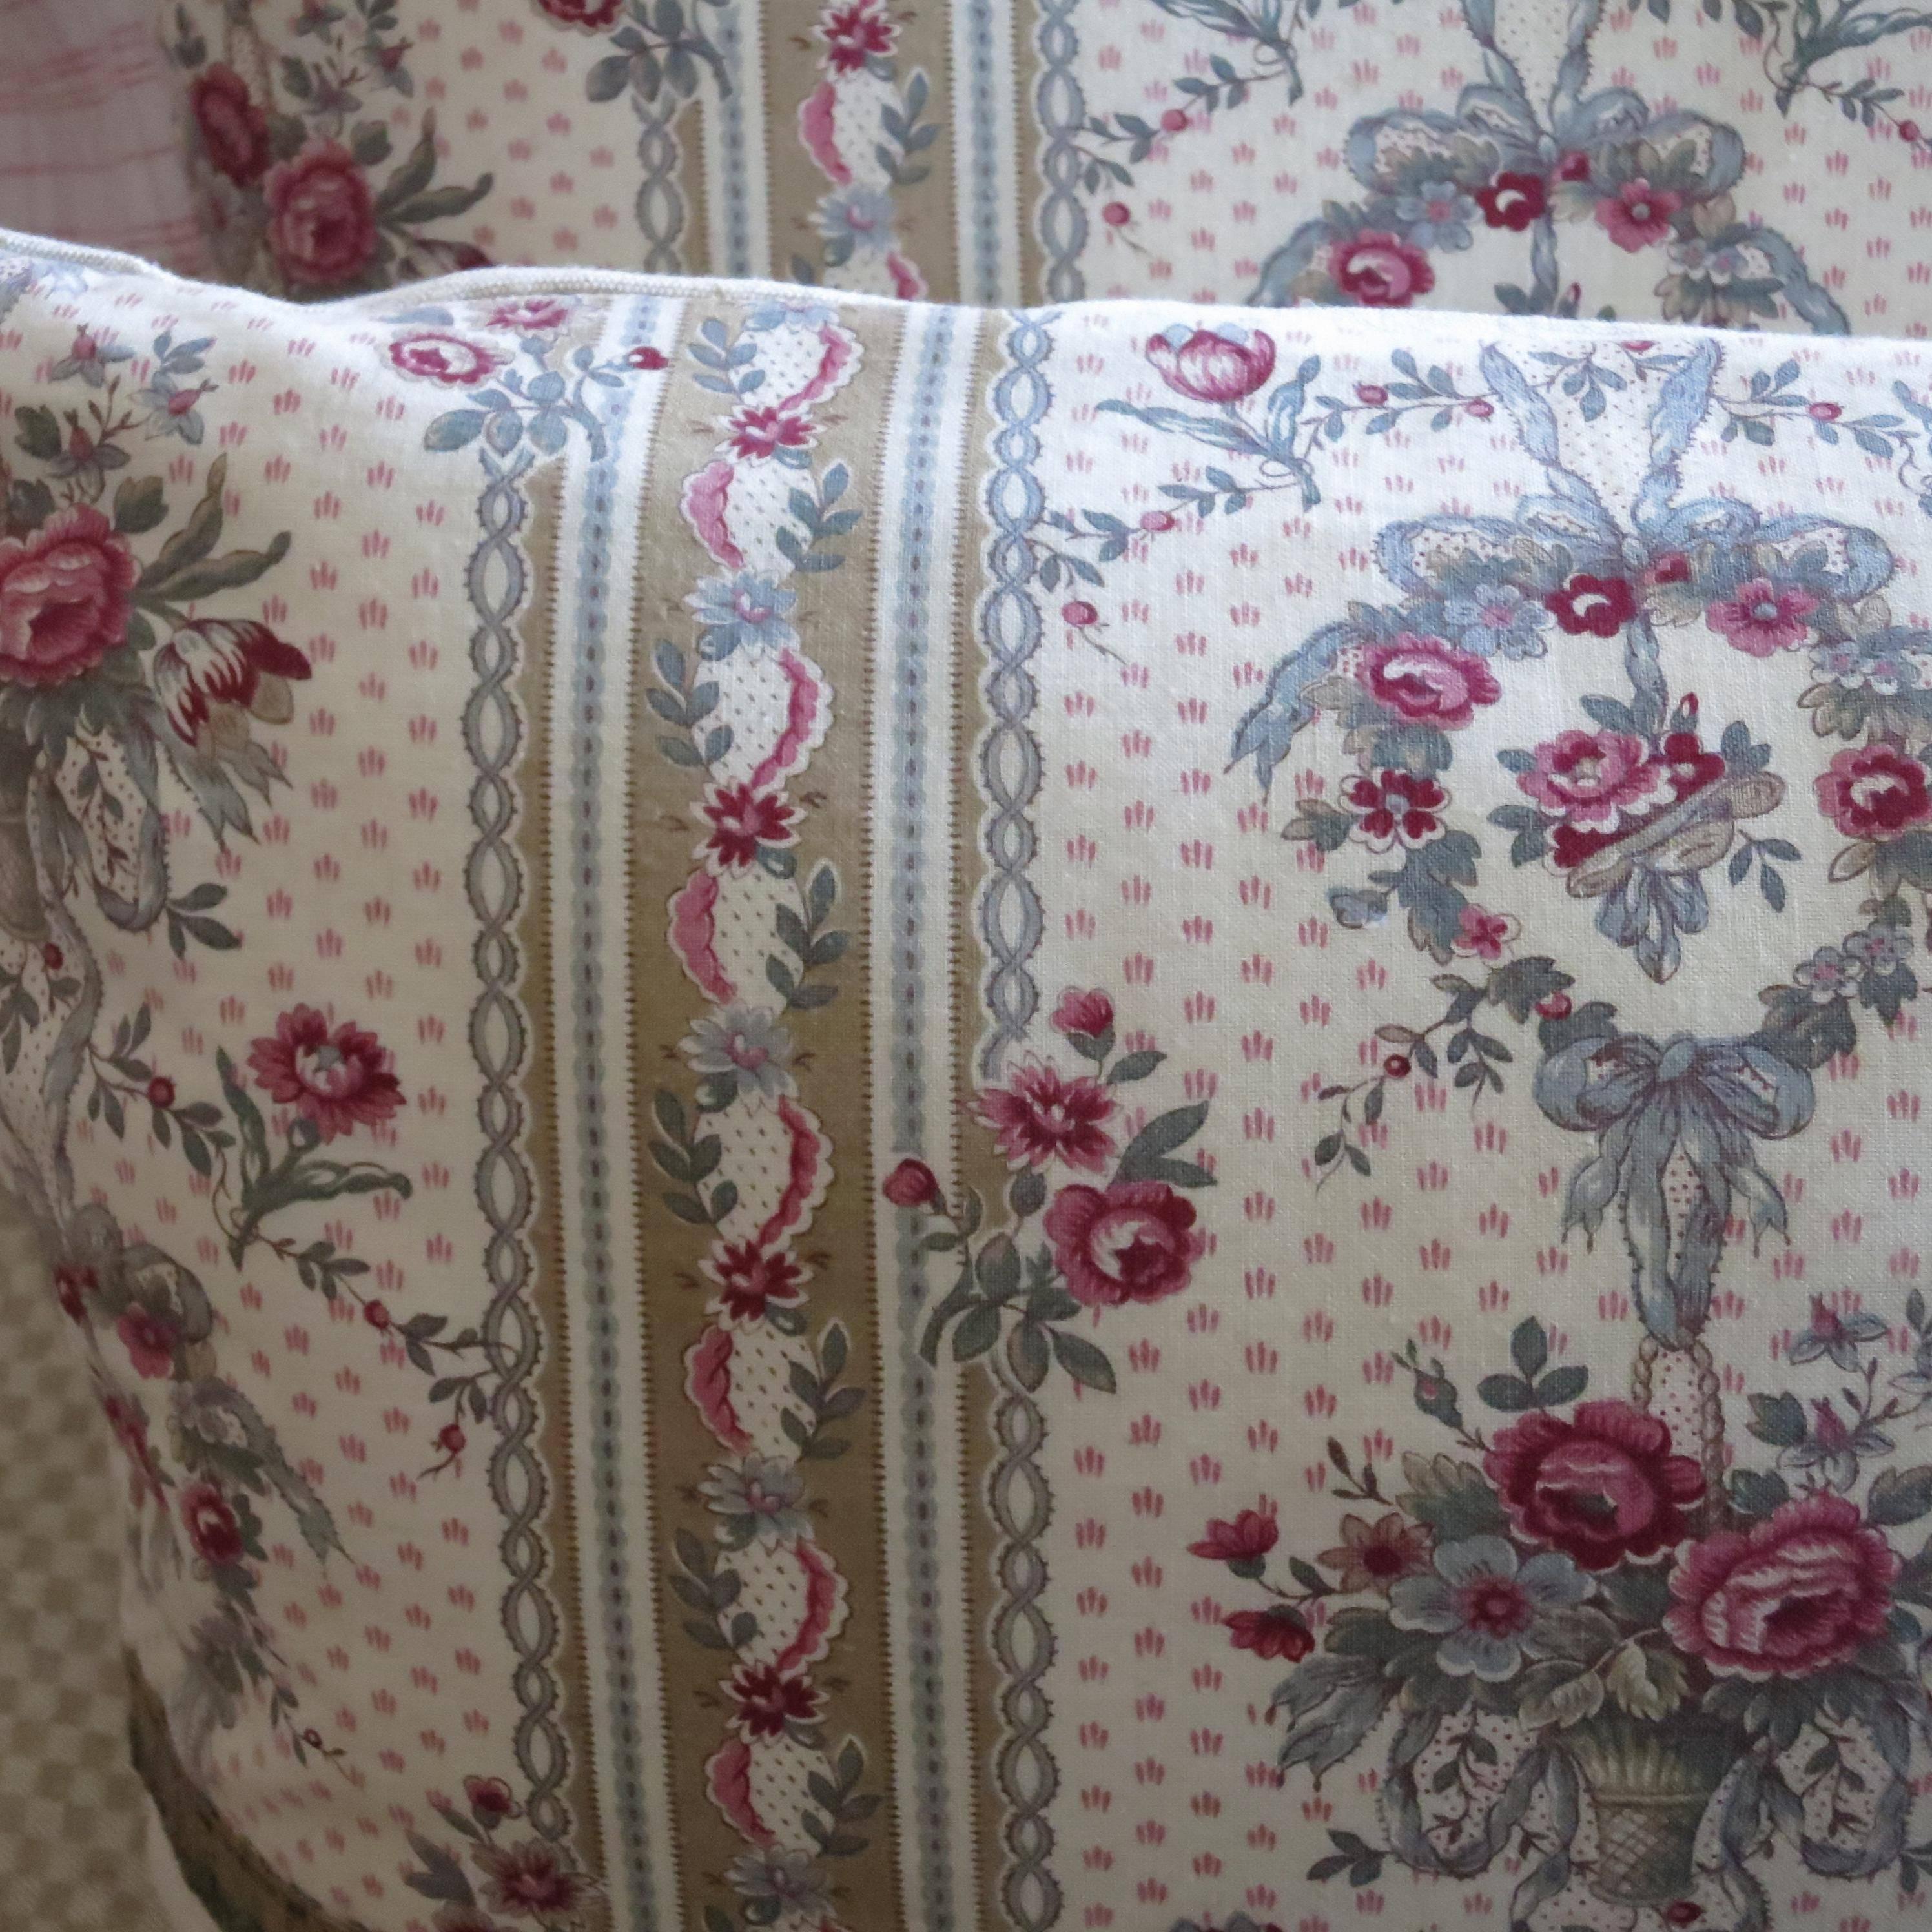 Pair of 19th Century Antique French Block Printed Textile Pillows 2